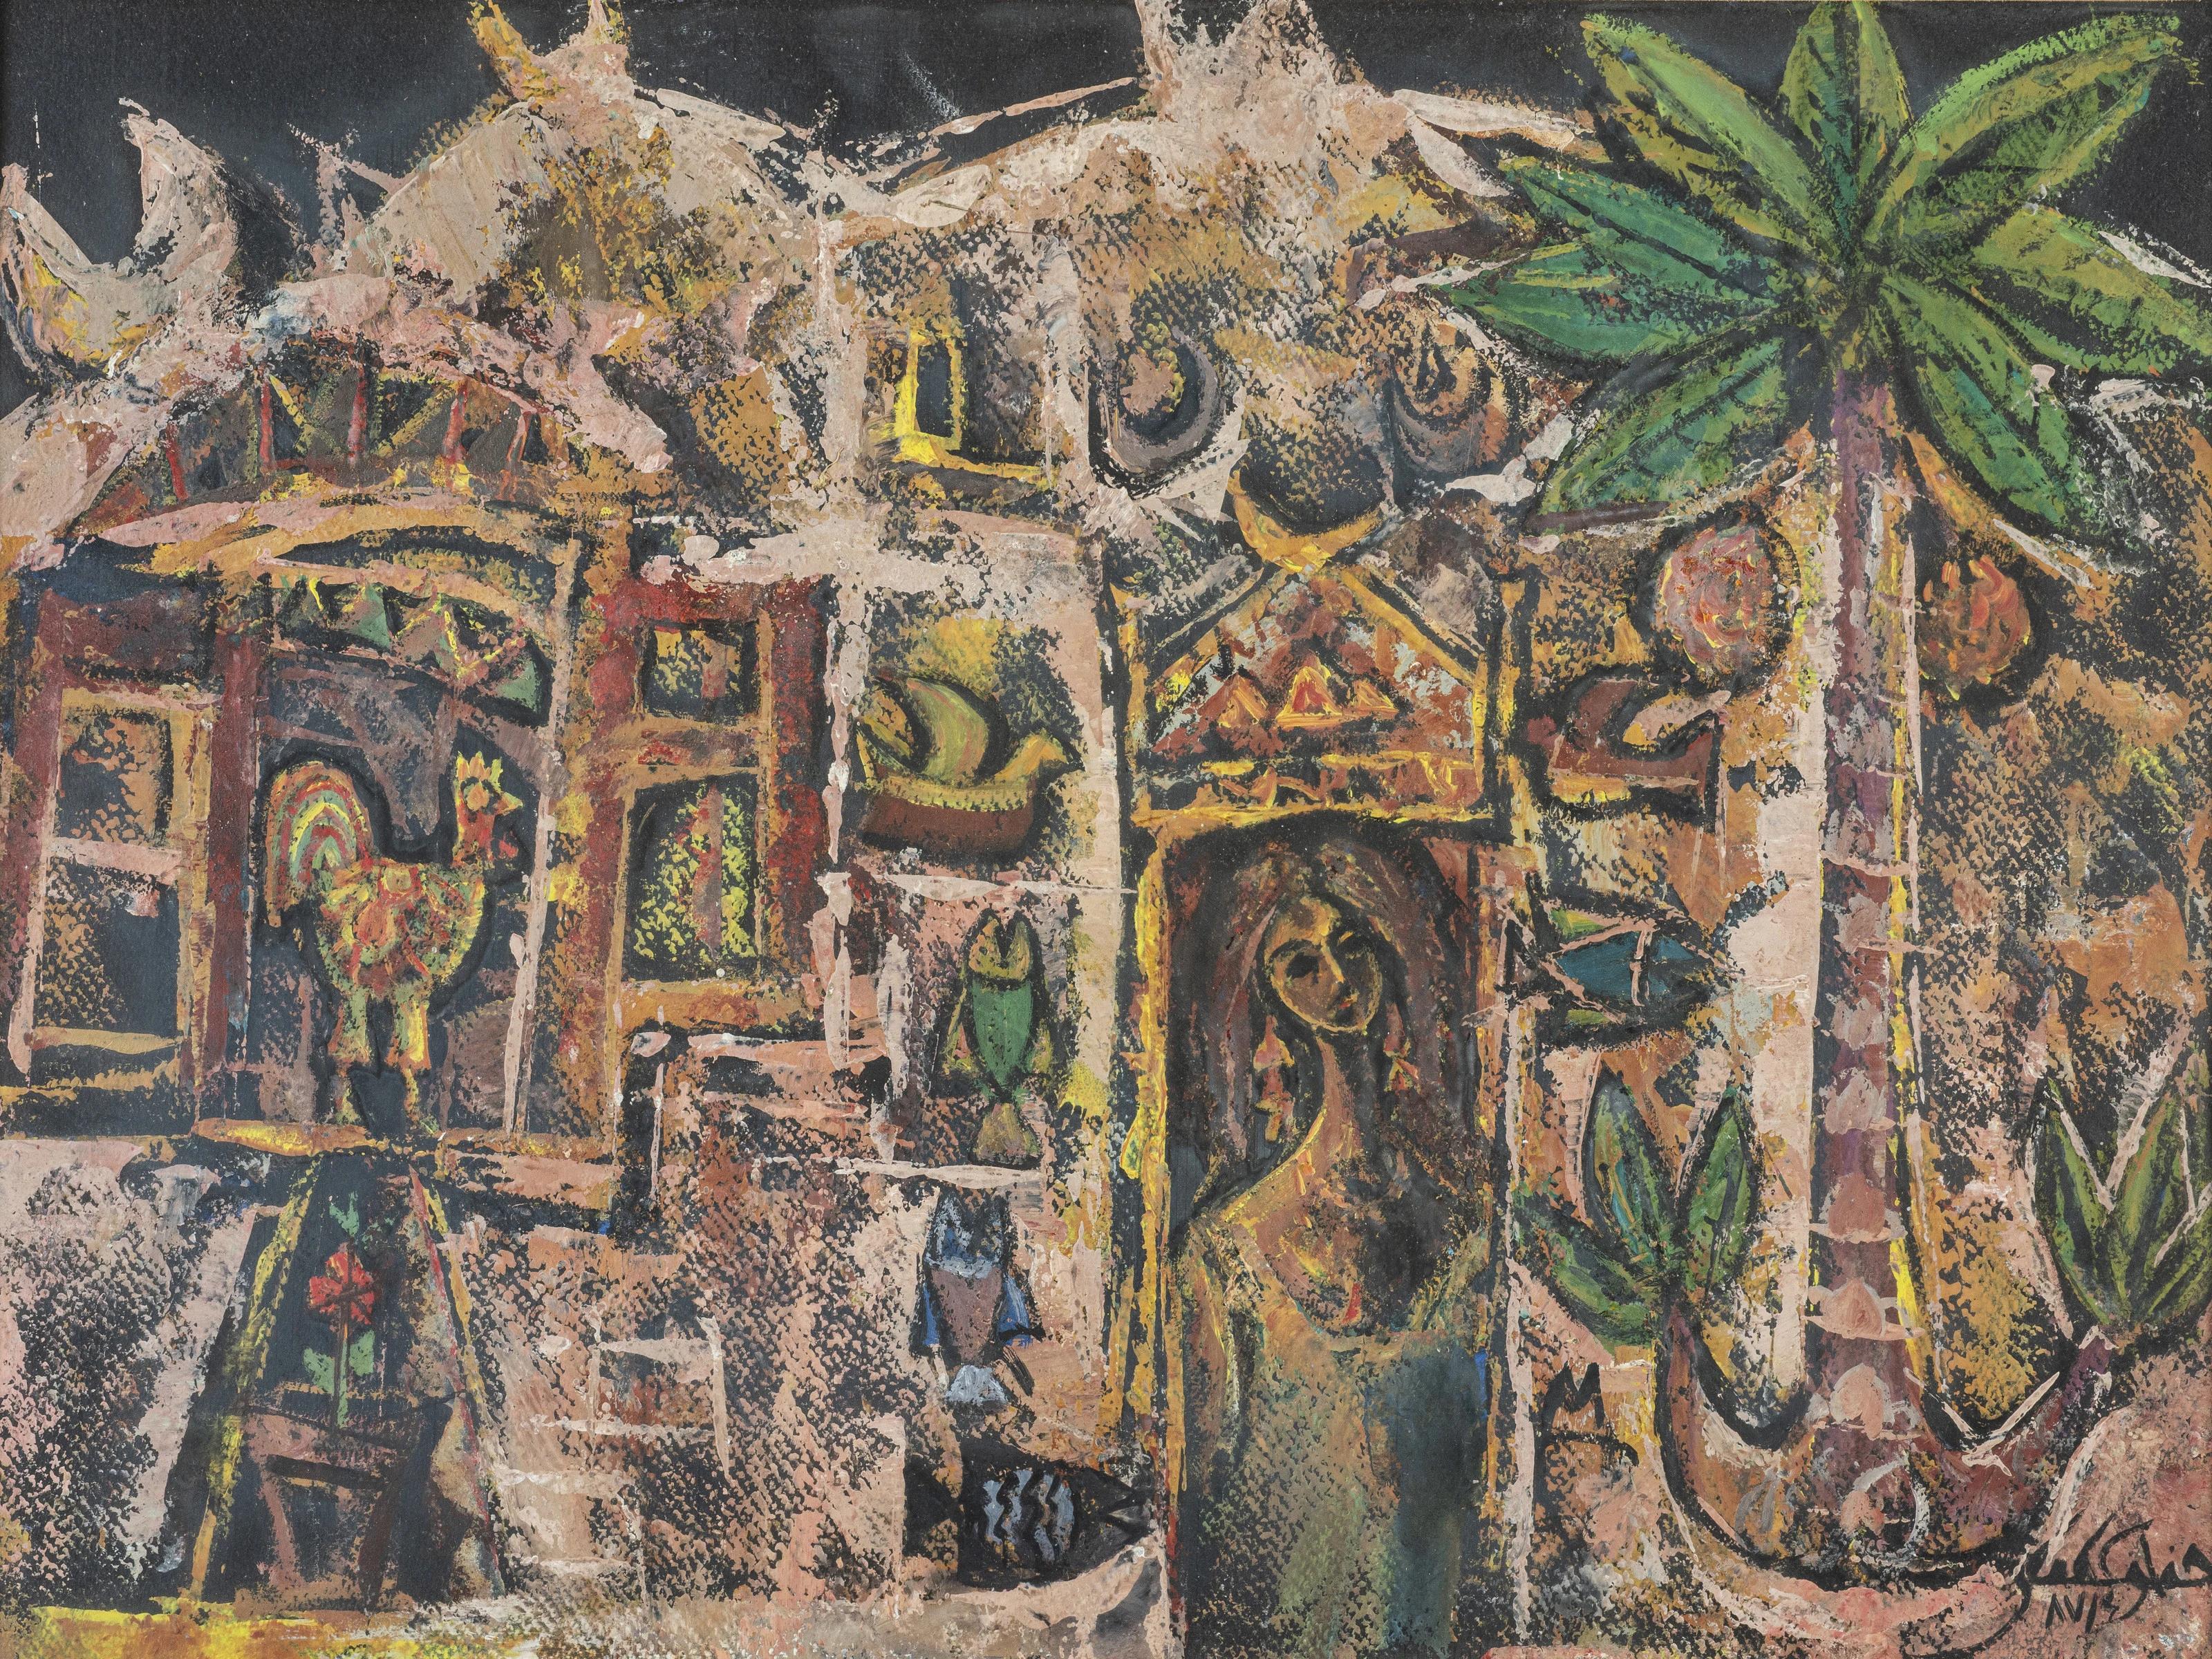 "Village Life" Oil painting 12" x 20" inch (1987) by Fathi Afifi

Fathy Afifi is an Egyptian Postwar & Contemporary artist who was born in 1950. 
He participated in local and international exhibitions in Cairo, Berlin and Vienna. He won the seventh